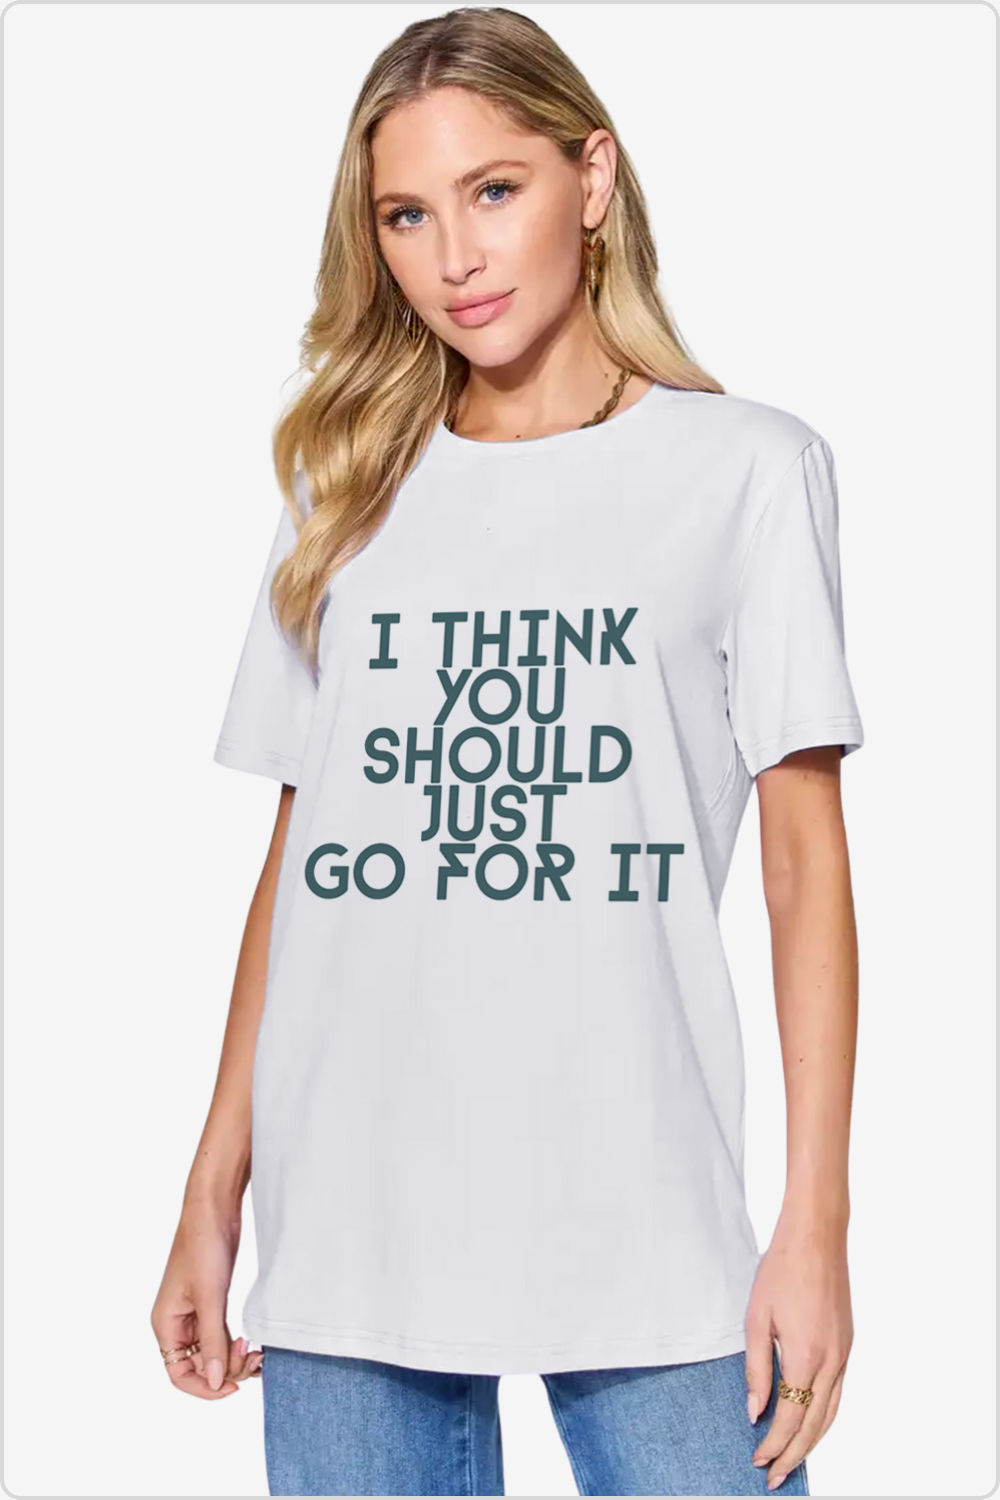 Emboldened 'I THINK YOU SHOULD JUST GO FOR IT' slogan on a crew neck T-shirt, front view